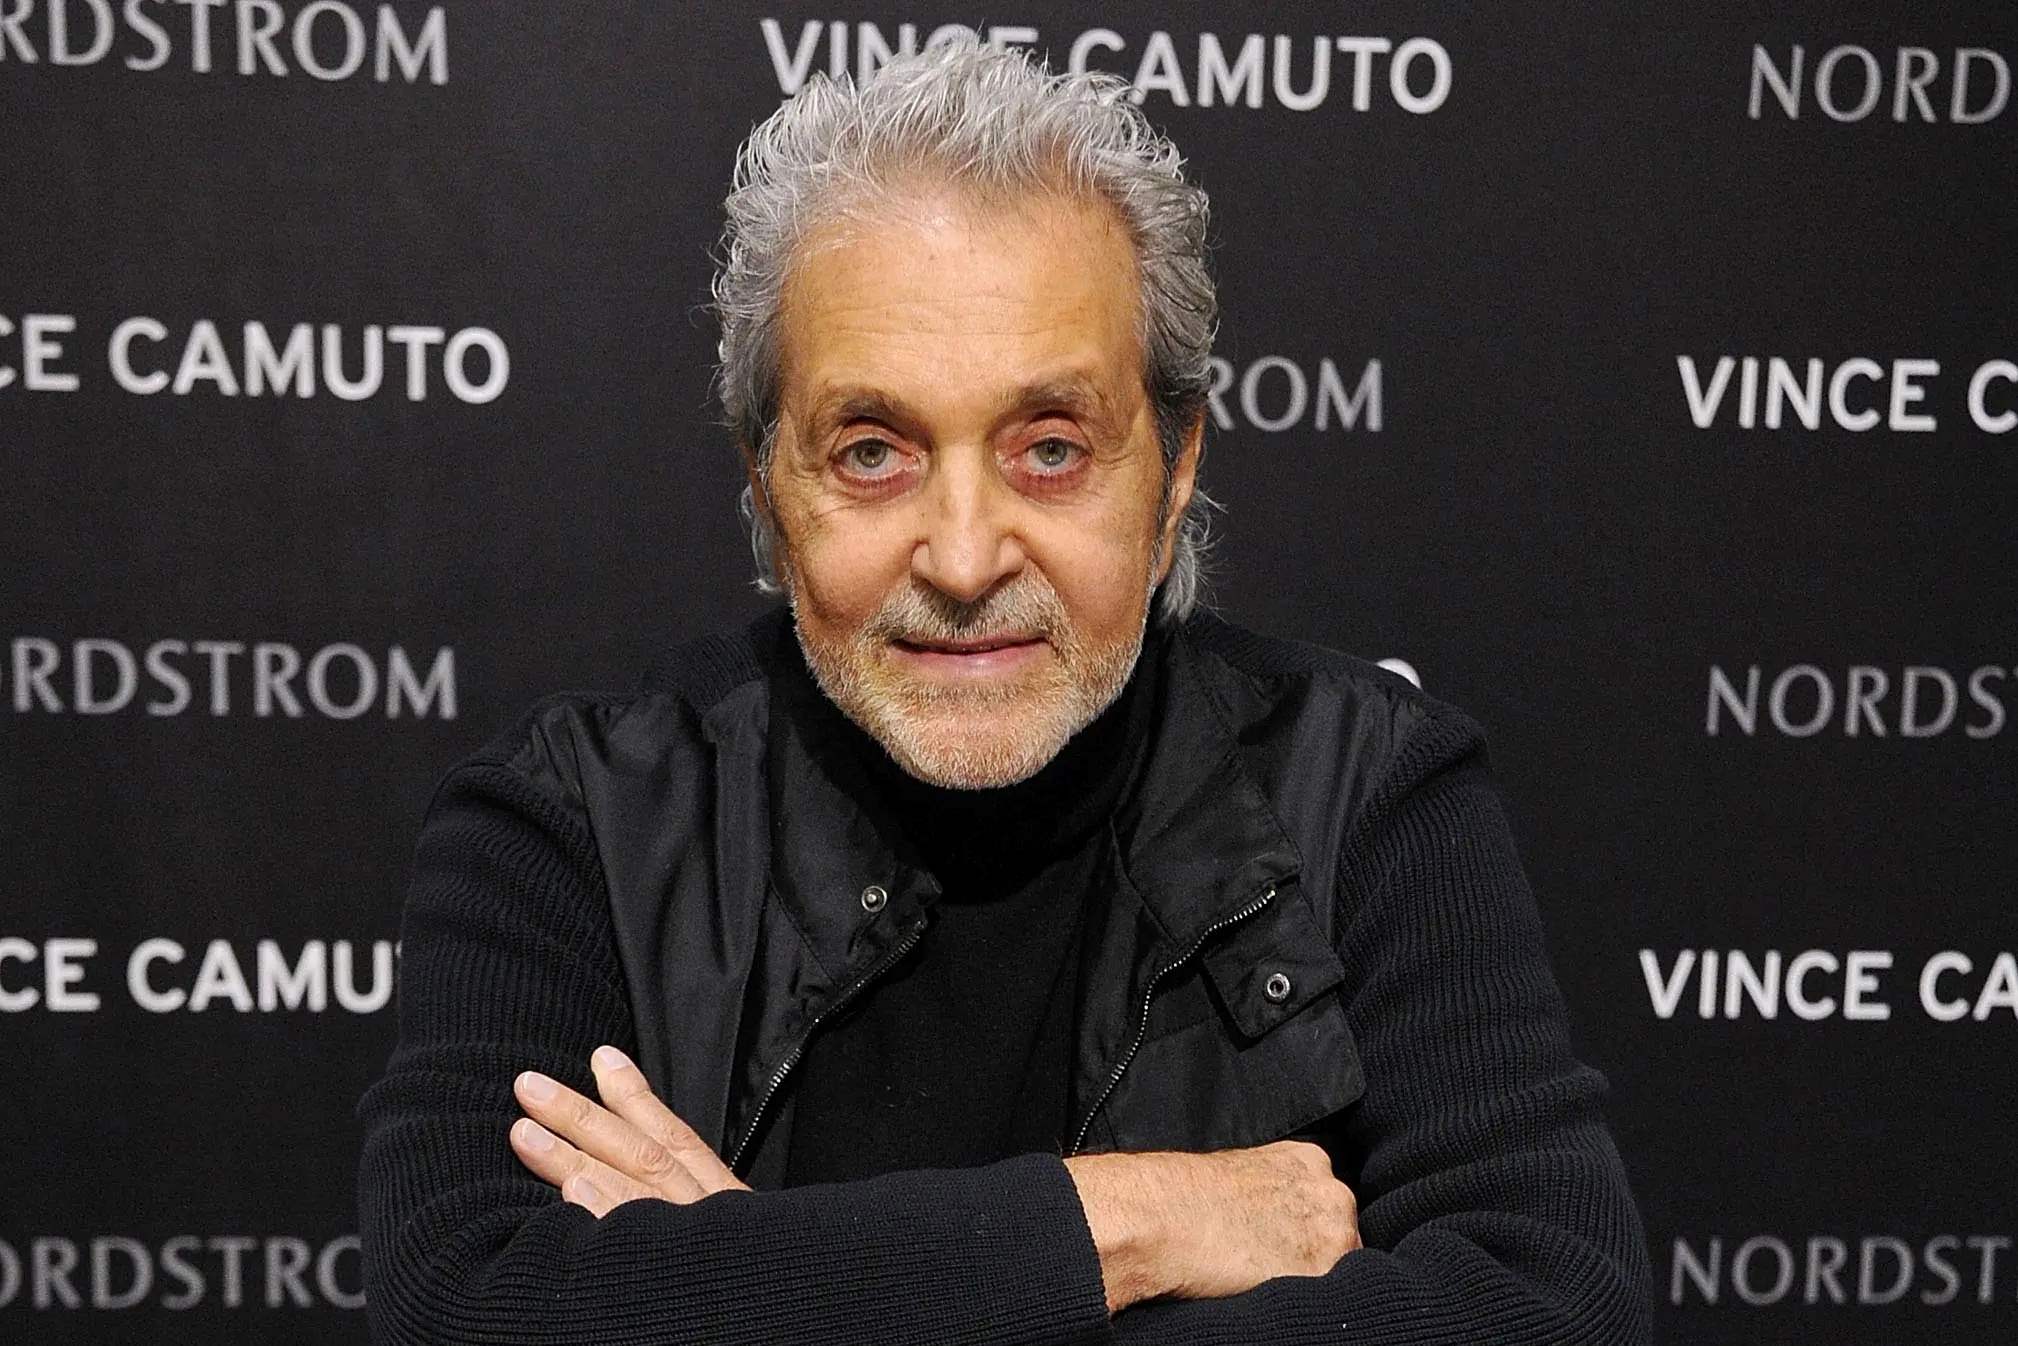 13 Intriguing Facts About Vince Camuto - Facts.net